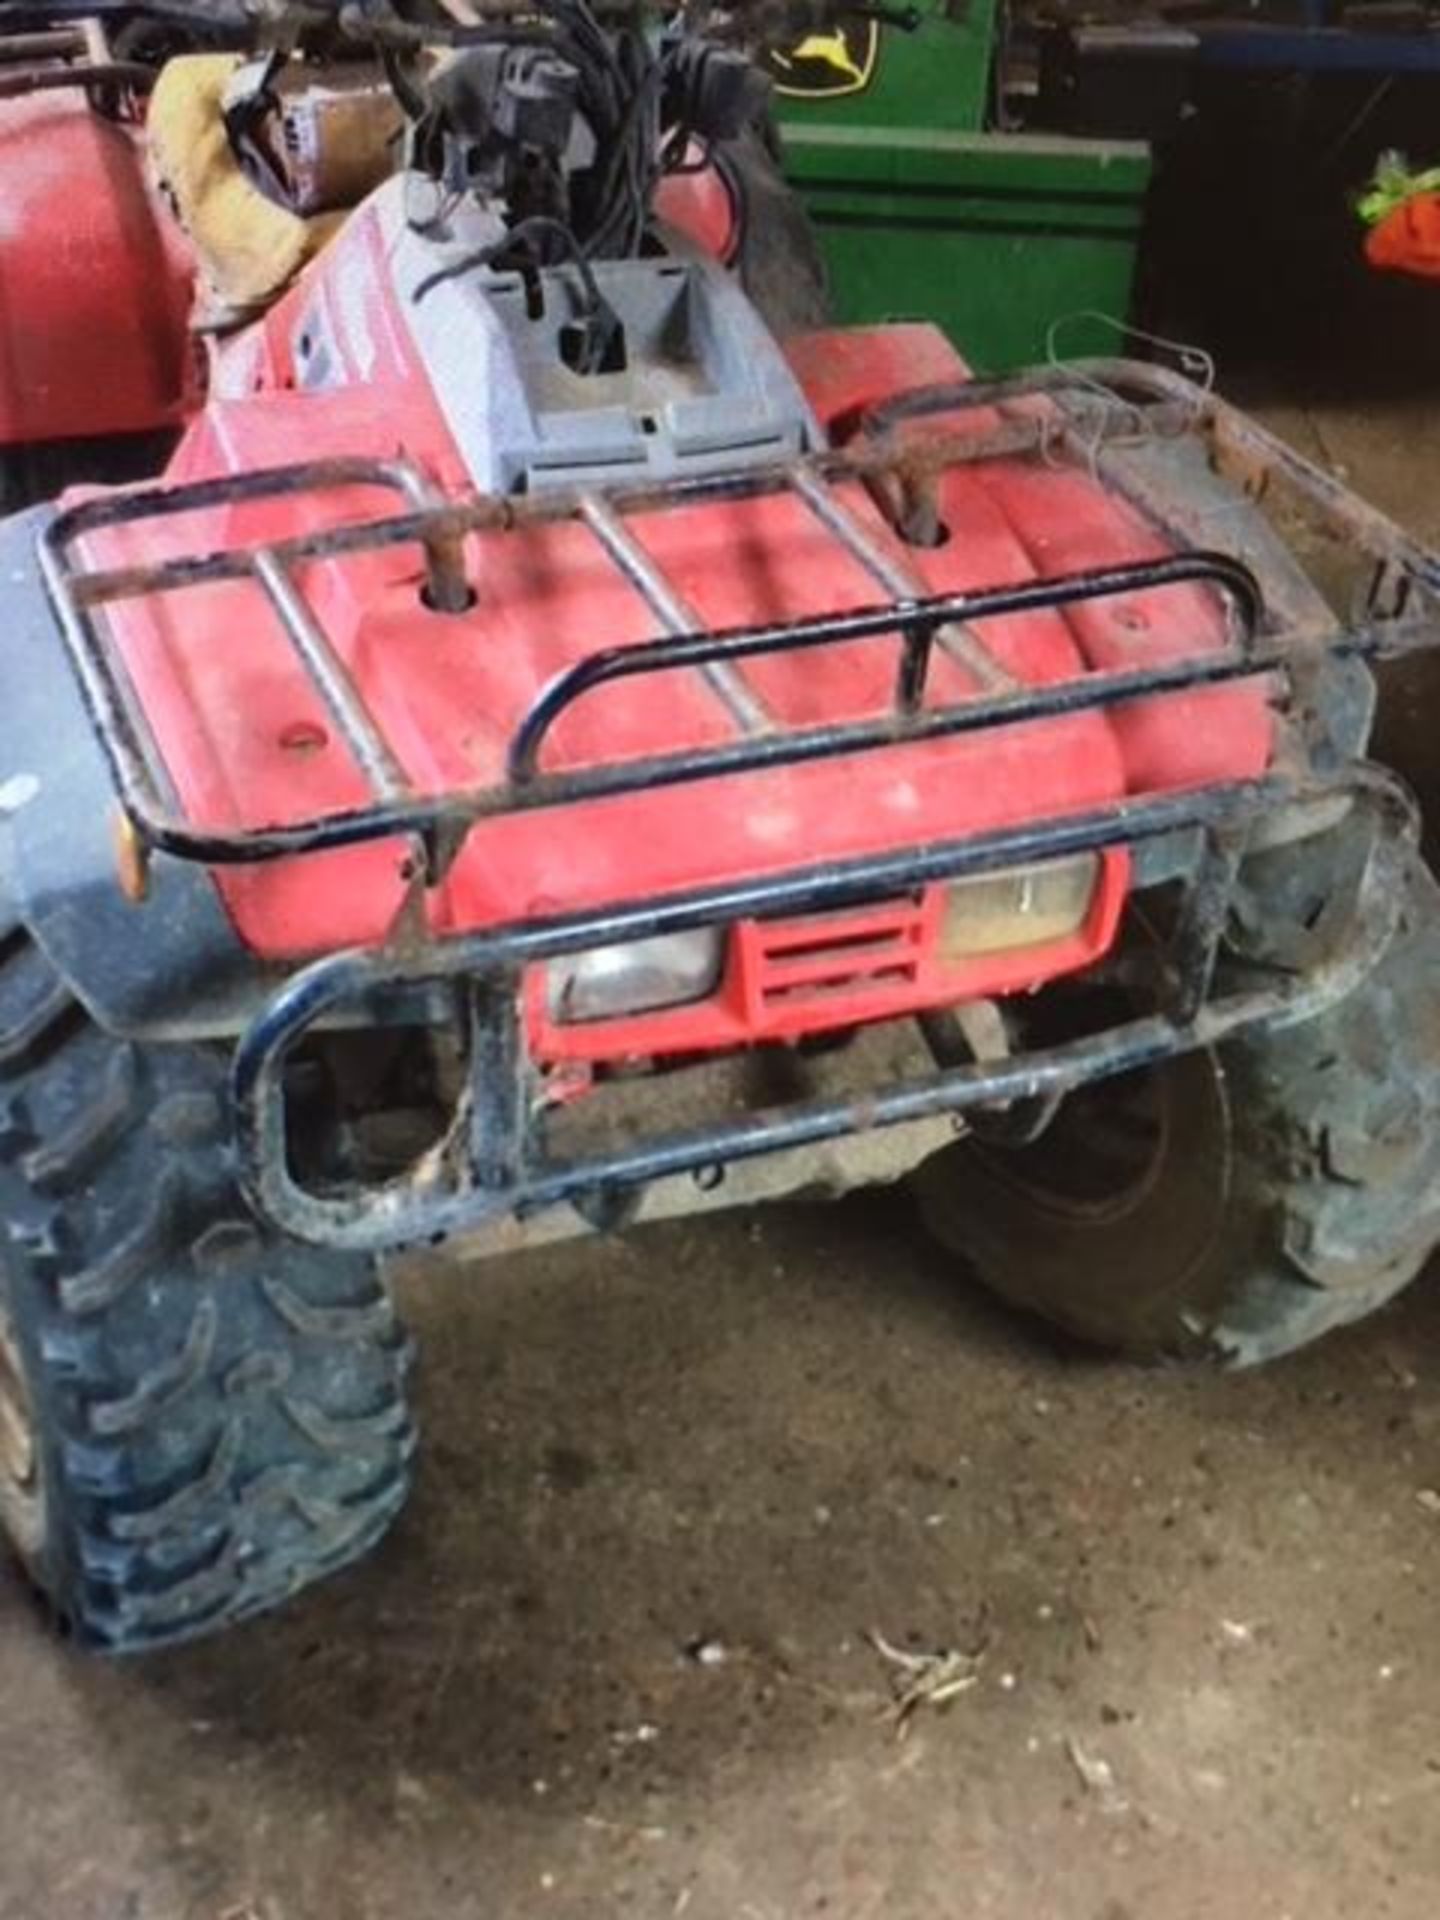 Honda 350 ATV, early 90's, petrol, advised most reliable machine on the farm, owned from new.